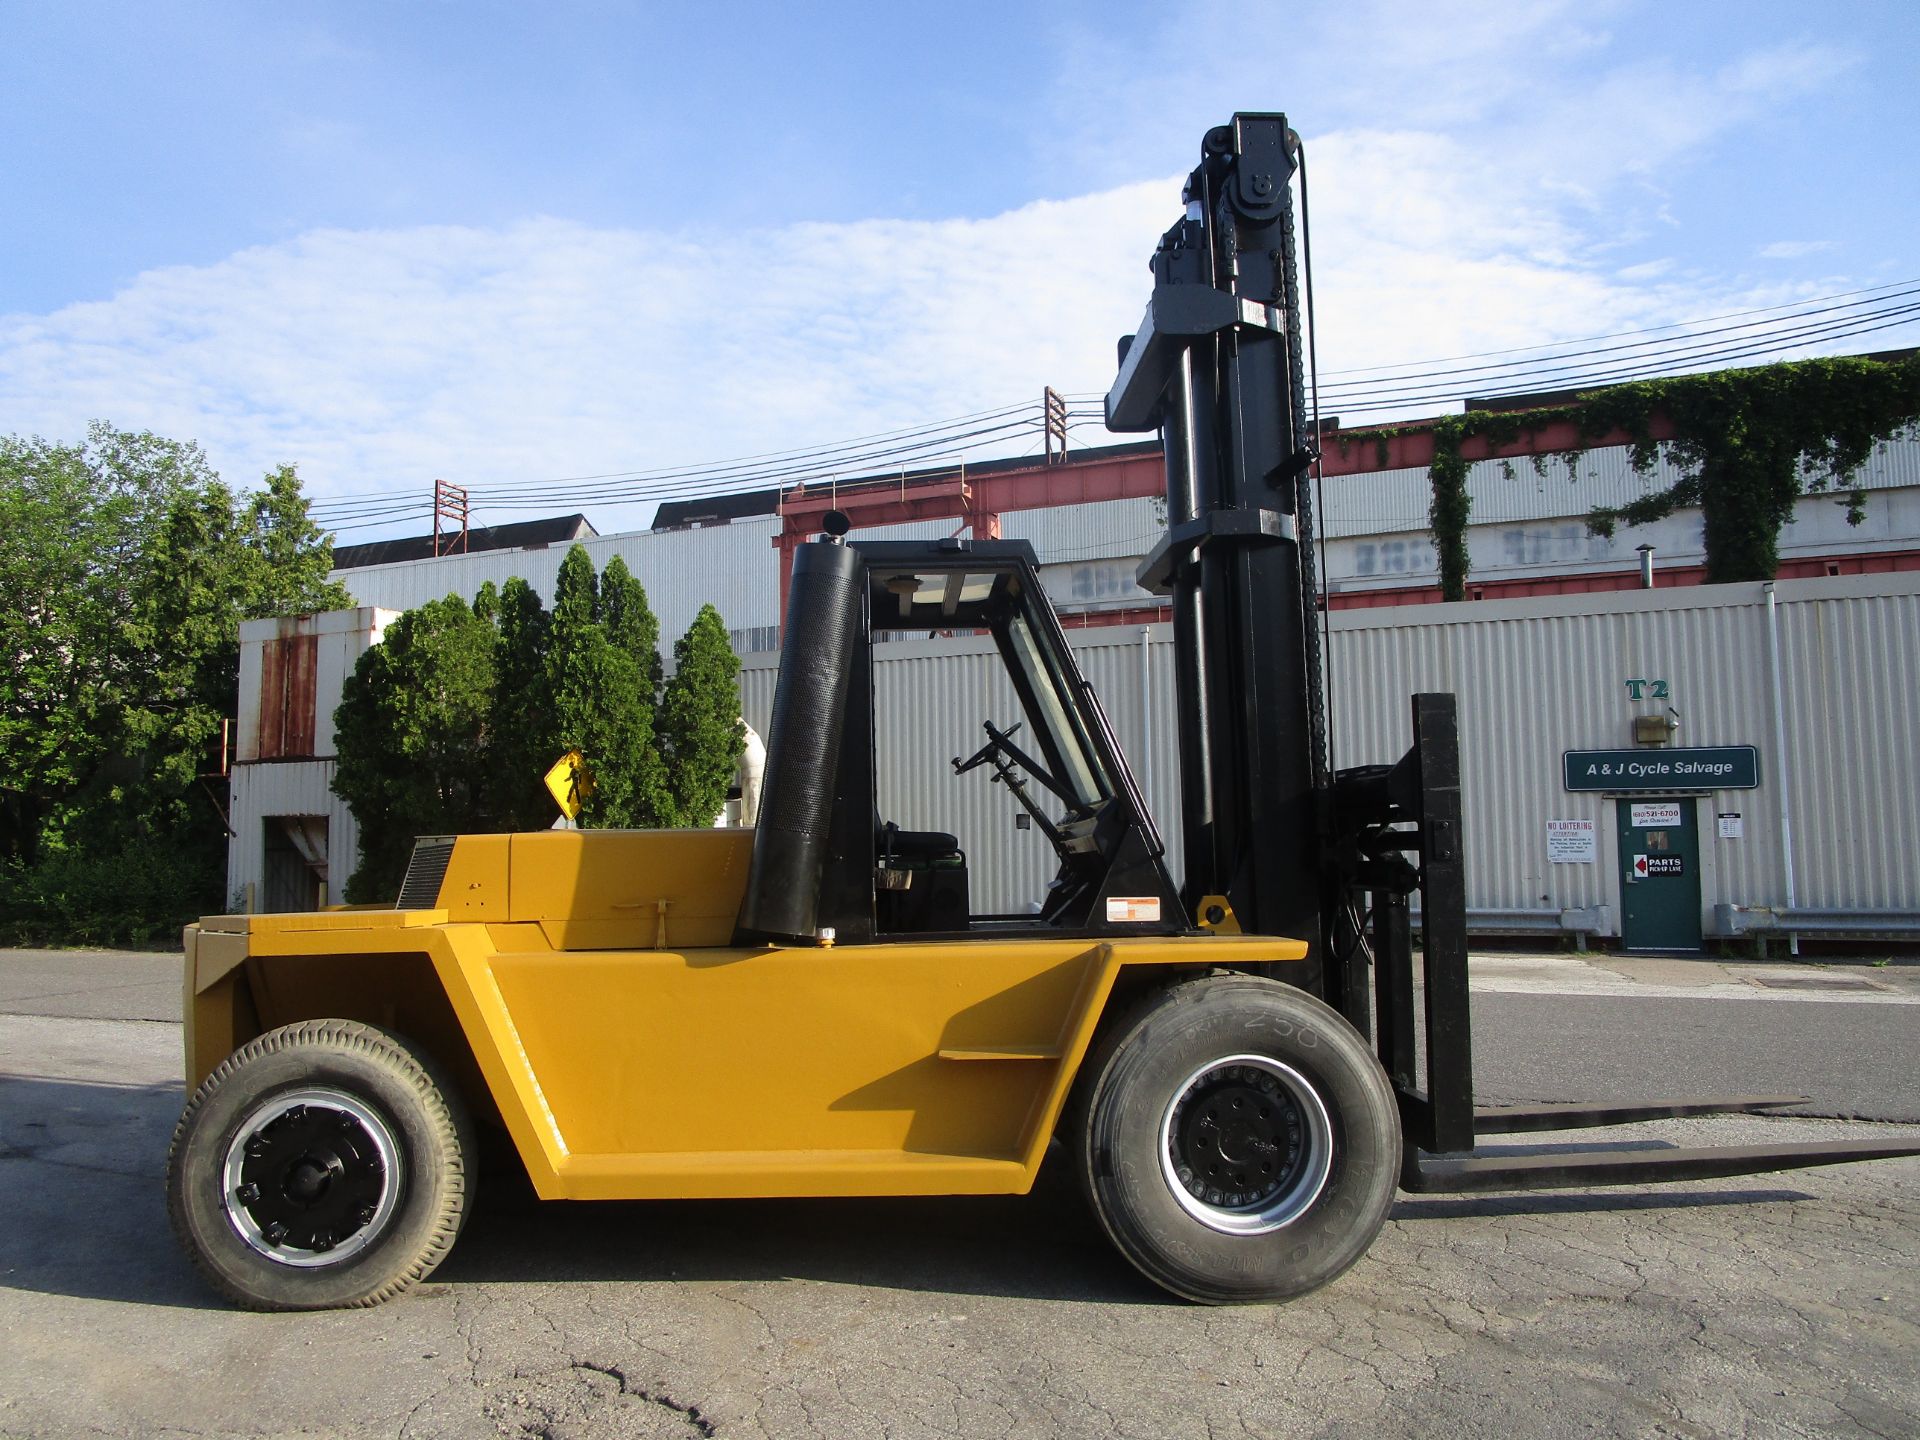 Caterpillar V250 25,000lb Forklift - Located in Lester, PA